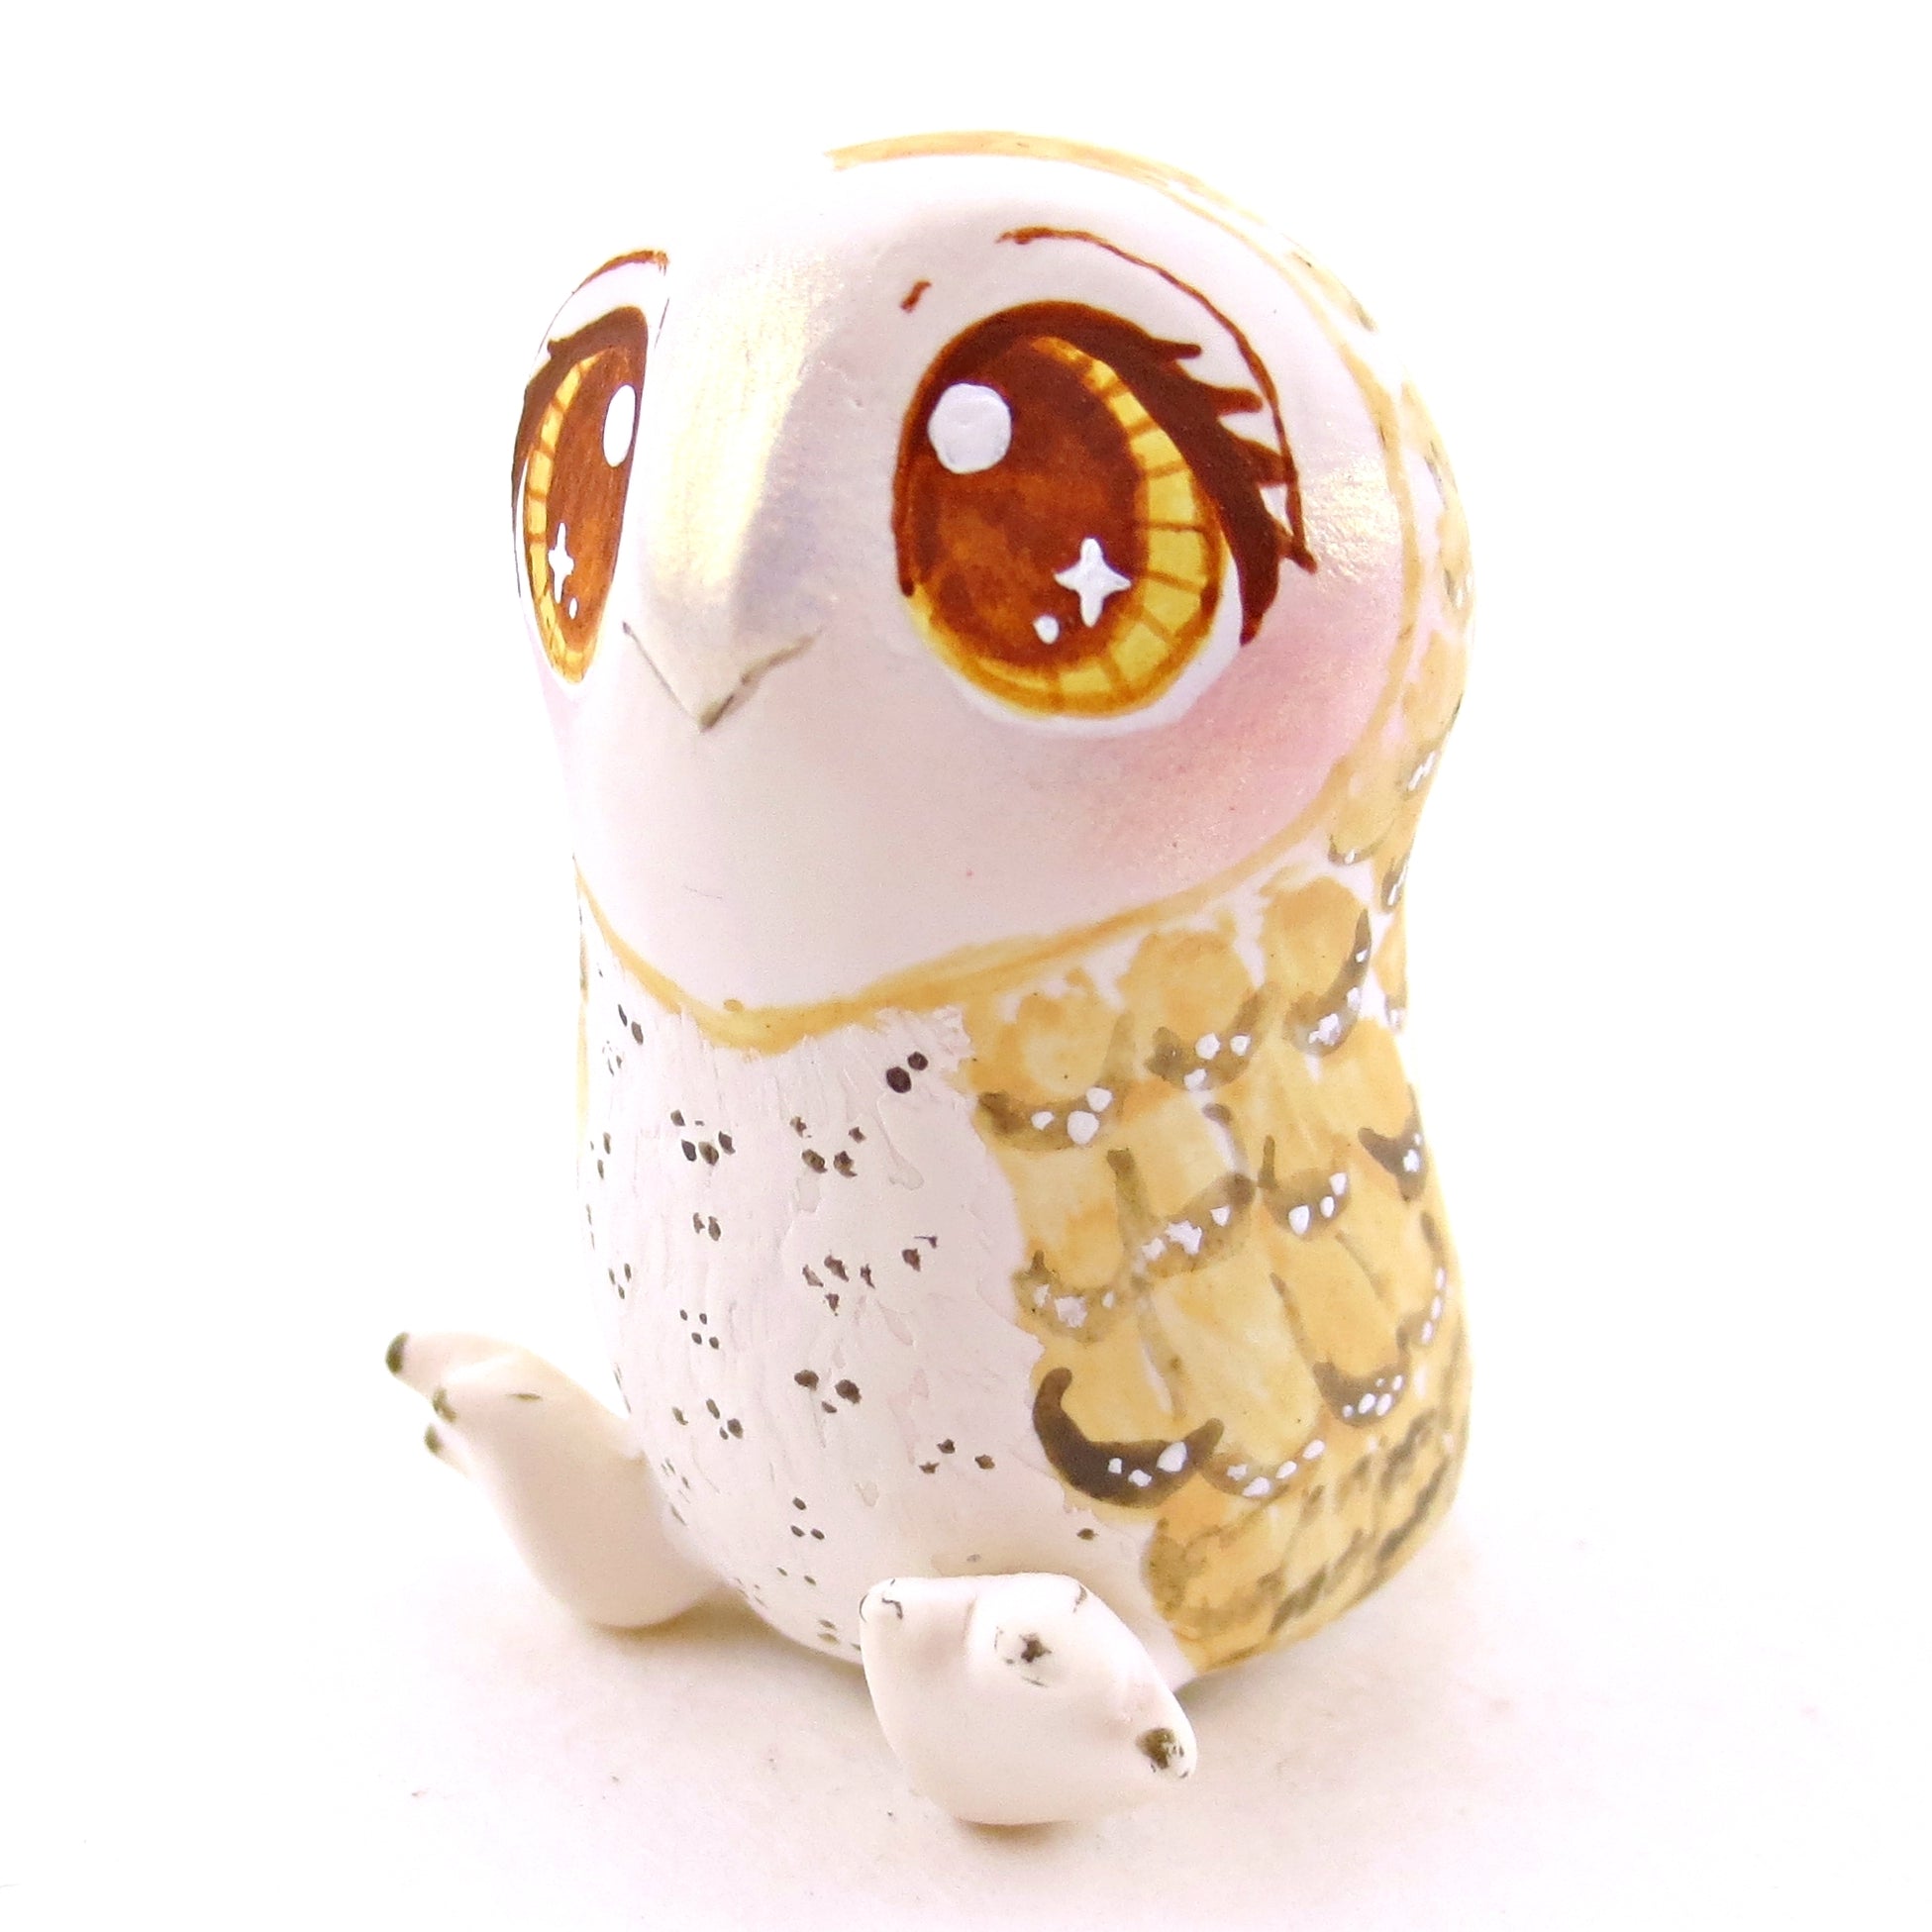 Amber-Eyed Barn Owl Figurine - Polymer Clay Cottagecore Fall Animal Collection